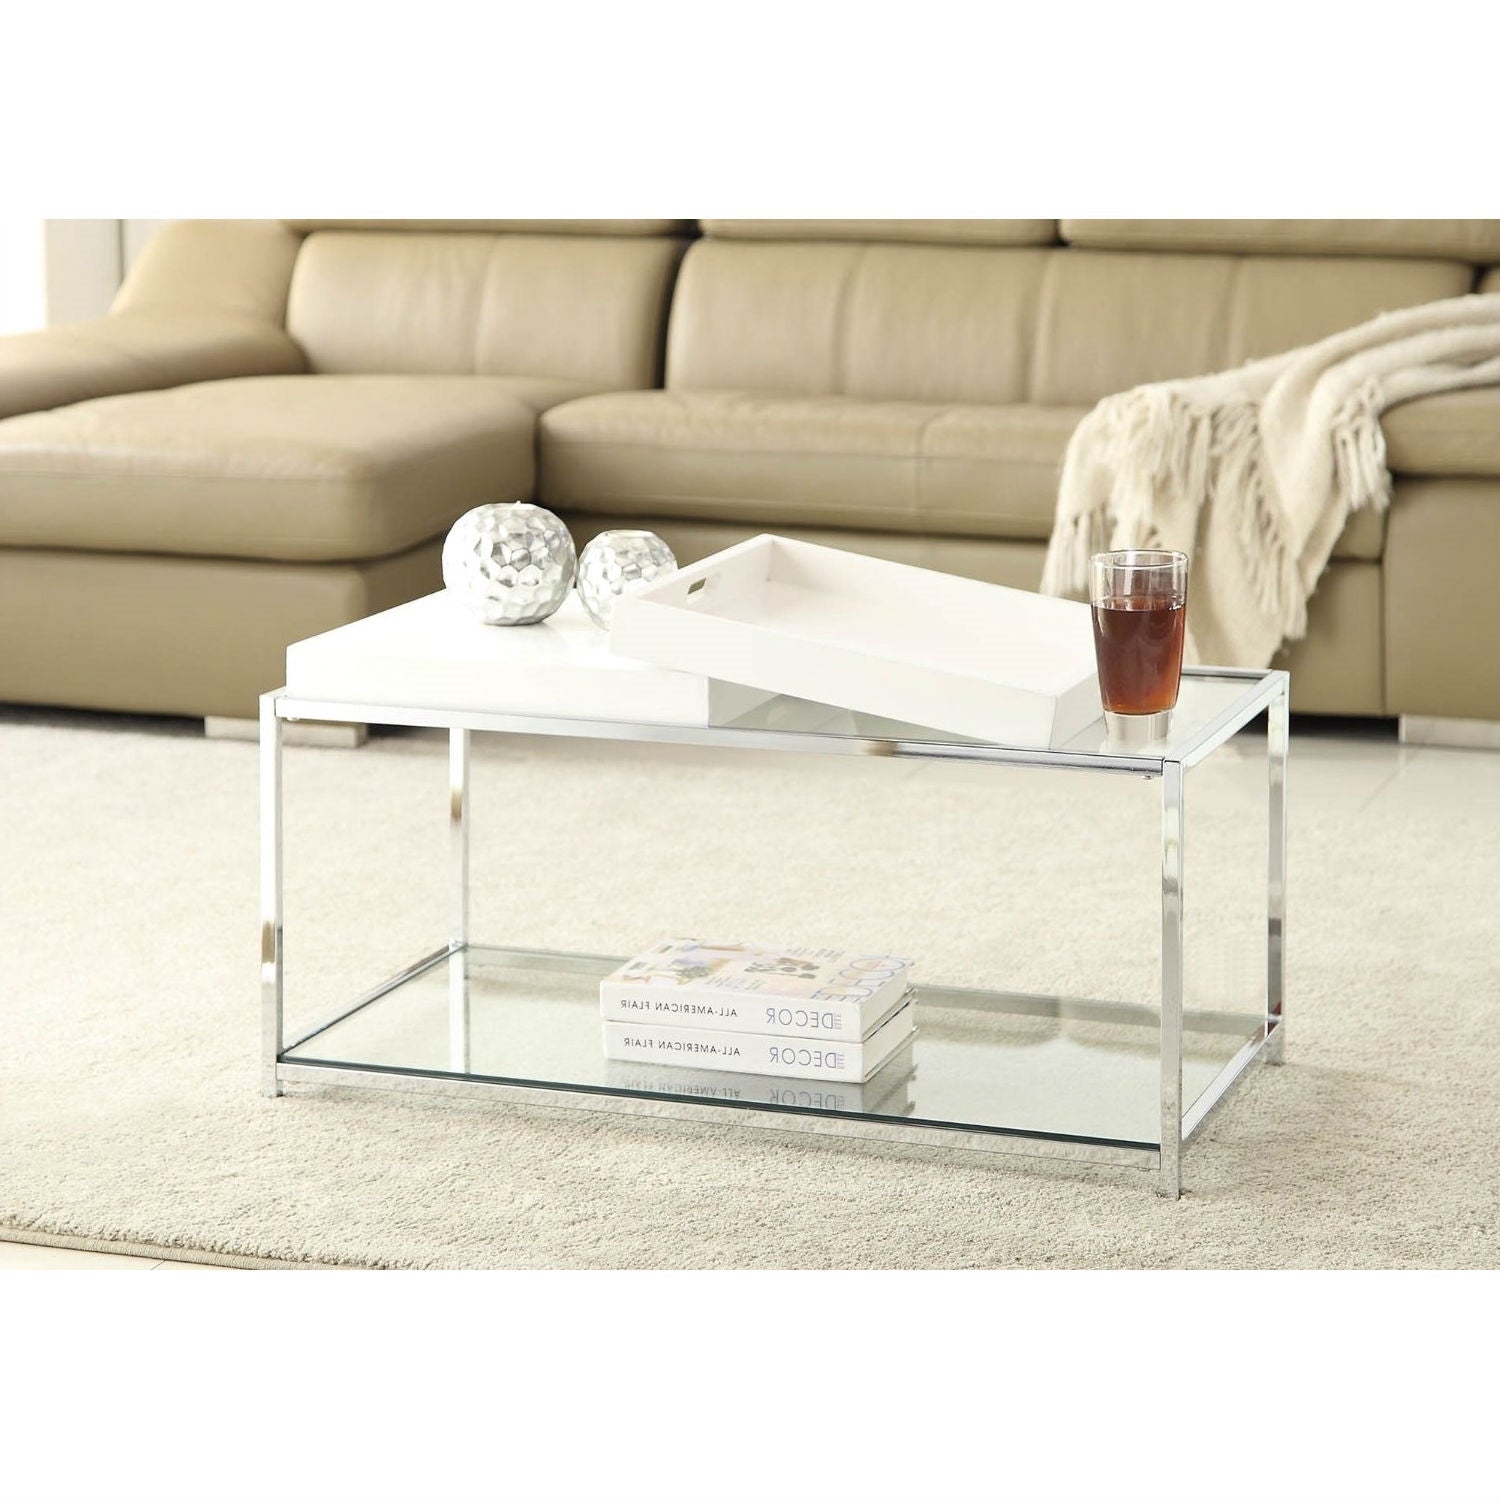 Living Room > Coffee Tables - Modern Chrome Metal Coffee Table With 2 White Removable Trays